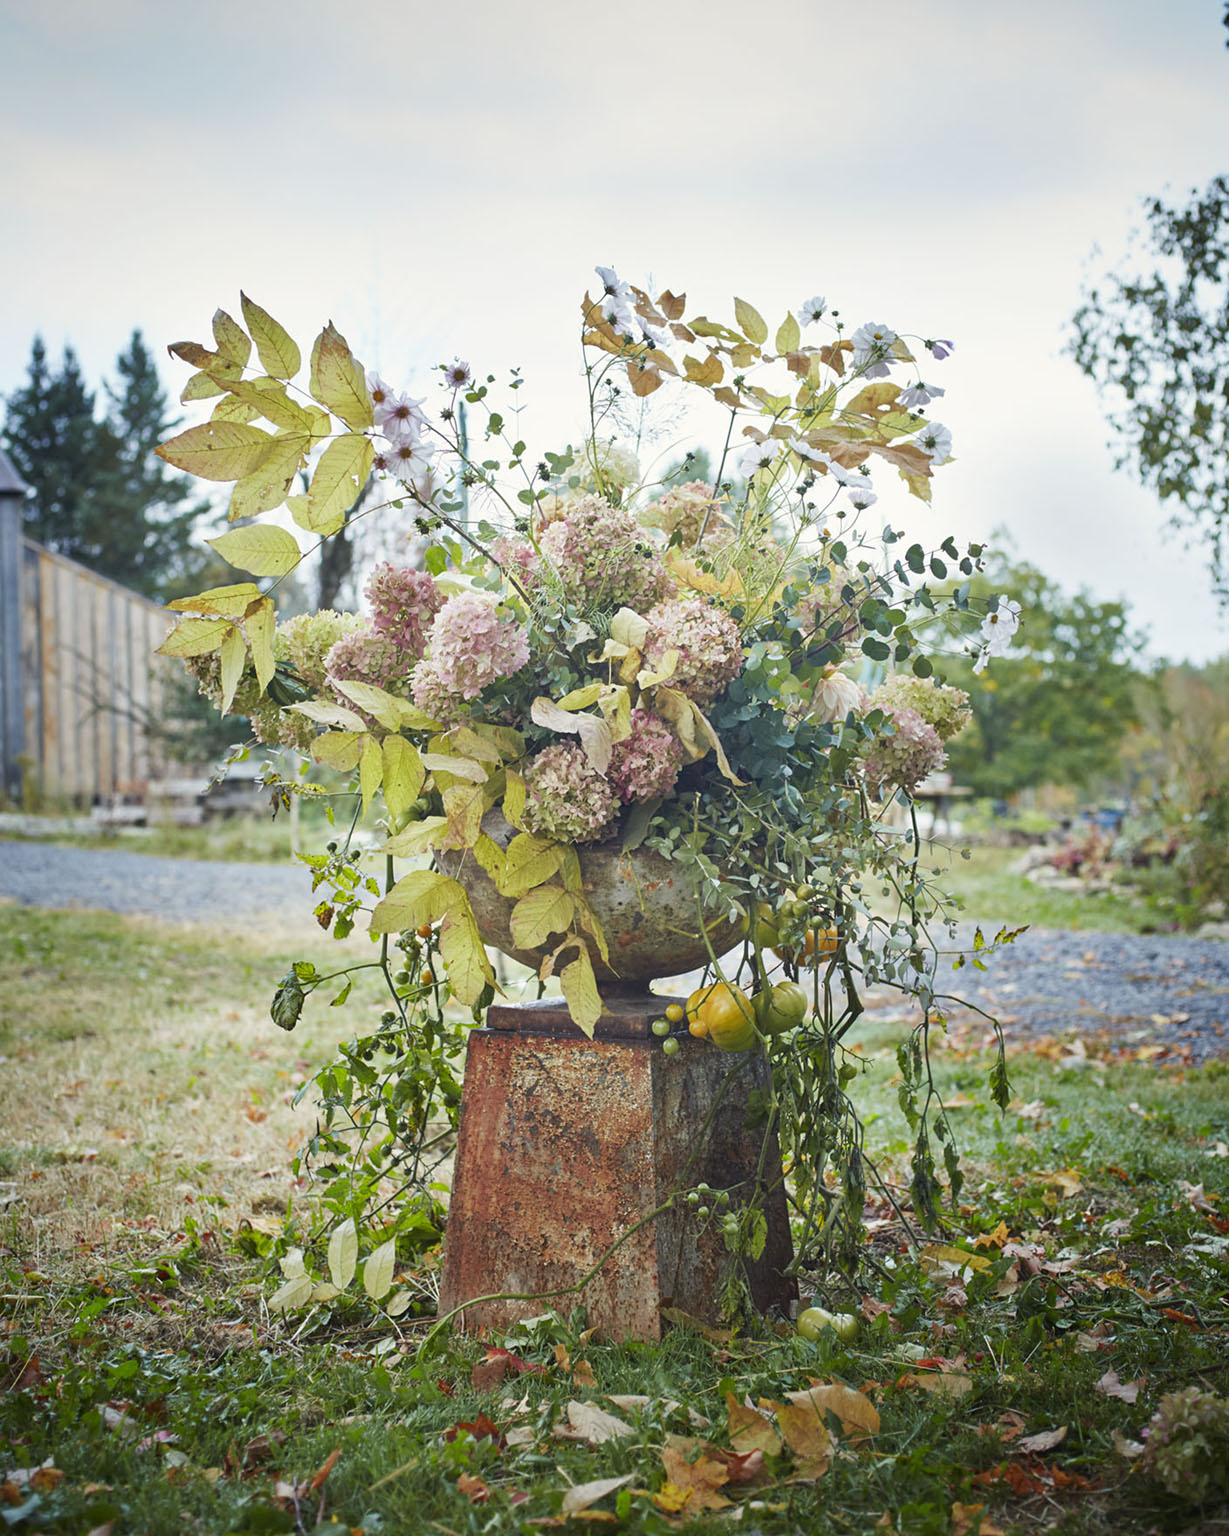 Wild autuman arrangement by Saipua featuring trailing vines and branches